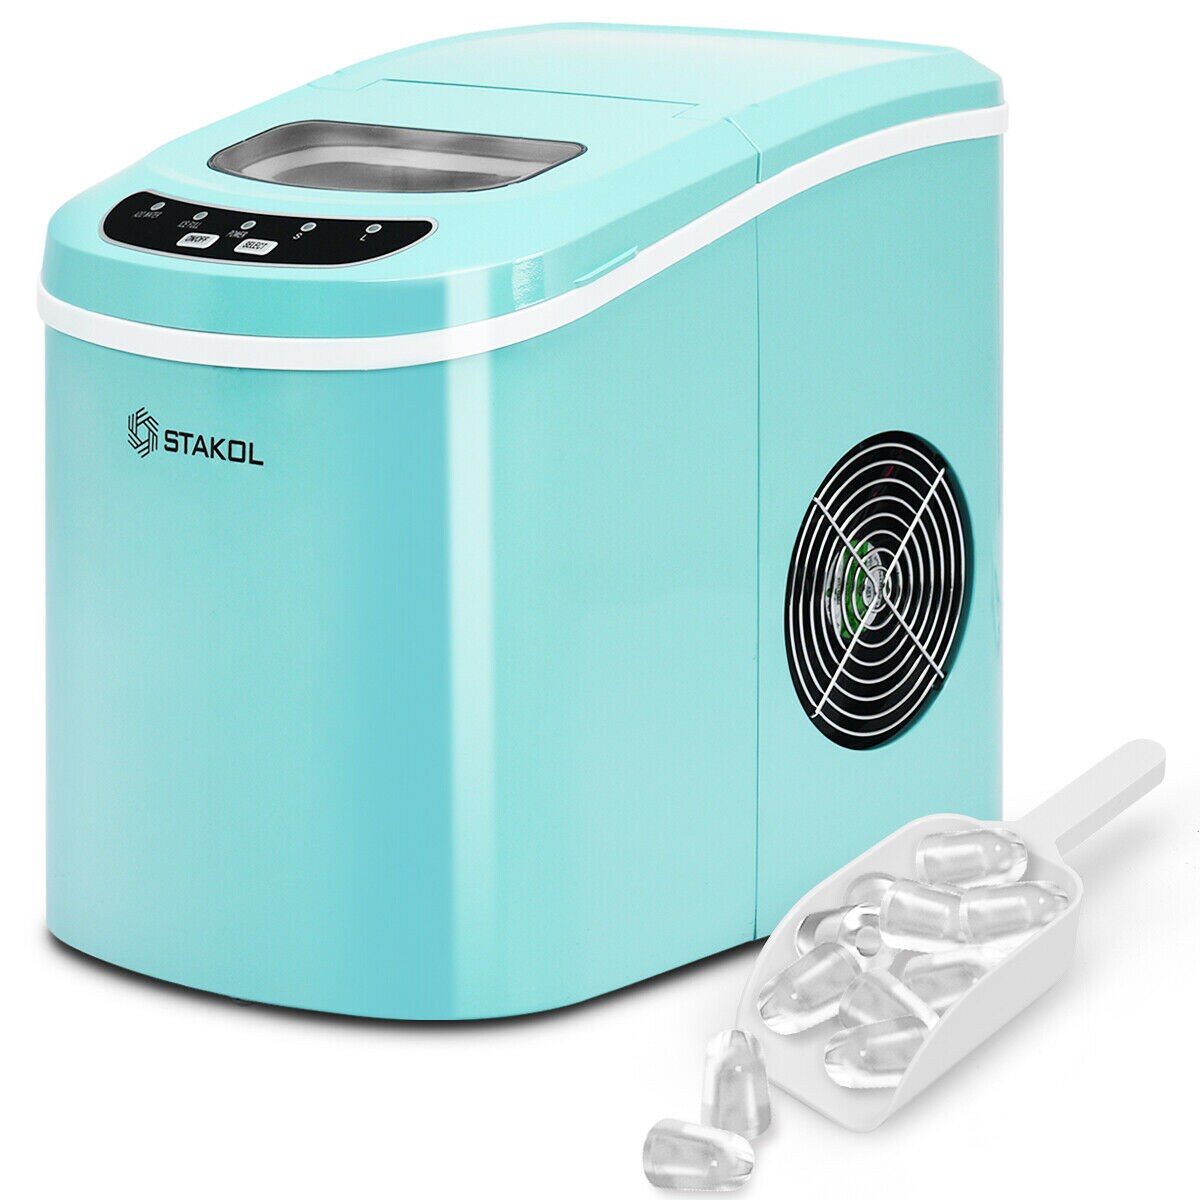 12Kg/24H Counter Top Ice Machine with Self-Cleaning Function Scoop and Removable Basket COSTWAY Ice Maker Machine Bullet Ice Cubes Ready in 7 Mins 2.1L Tank Mint Green 